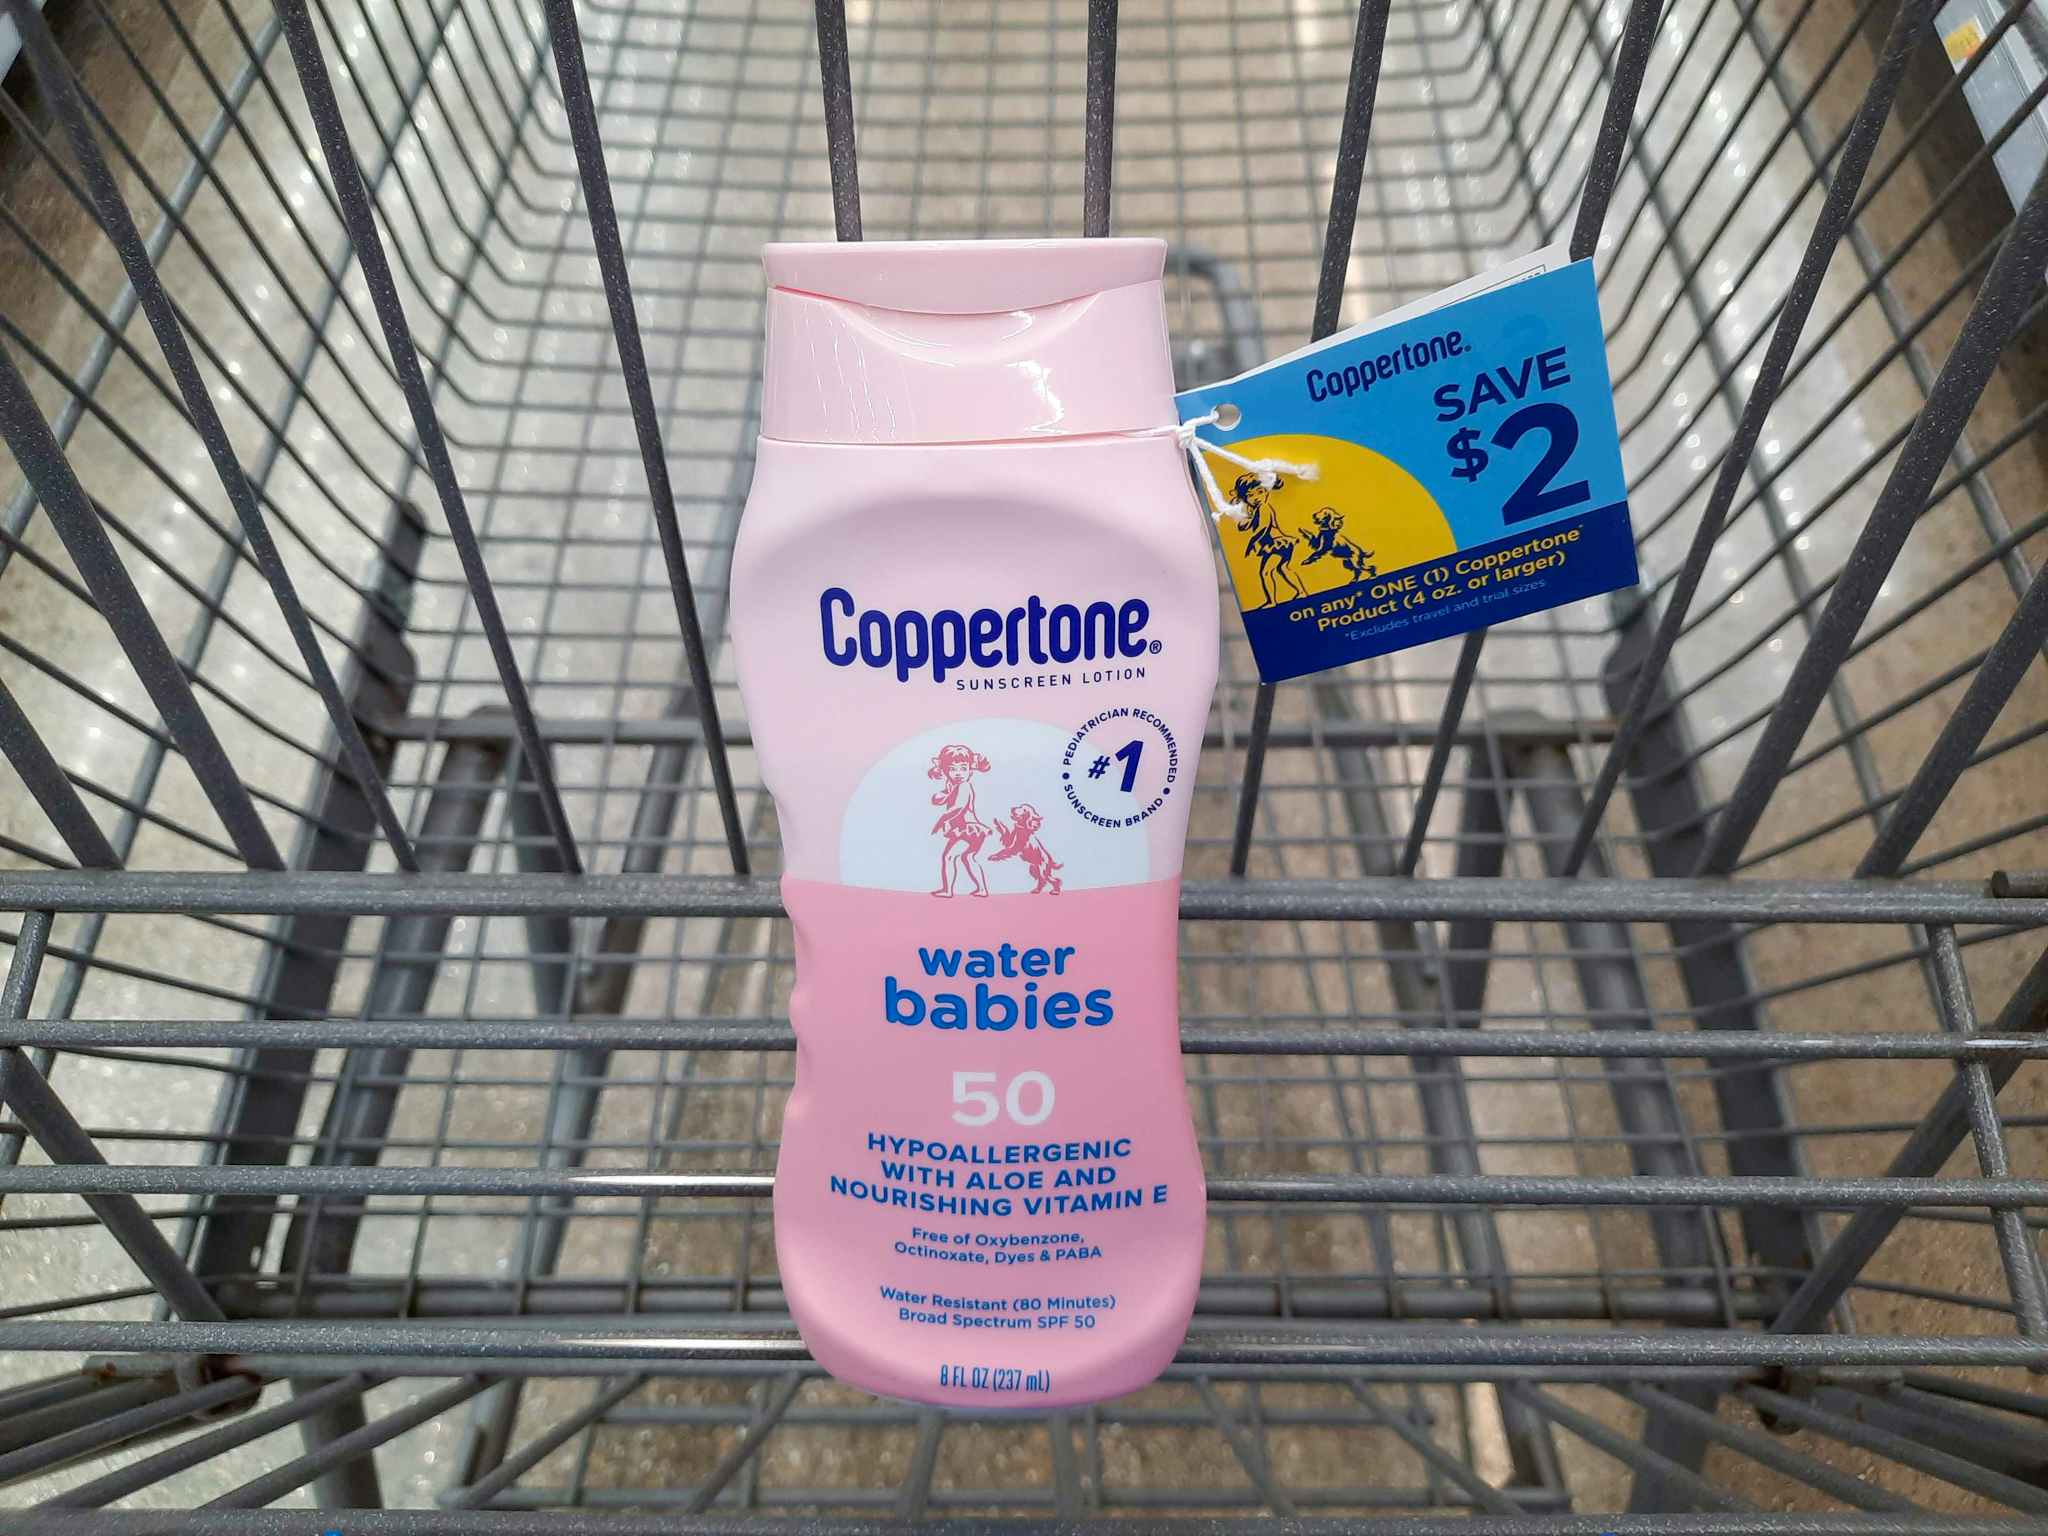 Coppertone Water Babies Sunscreen product in Walmart shopping cart. A $2 hangtag coupon is attached to the product.